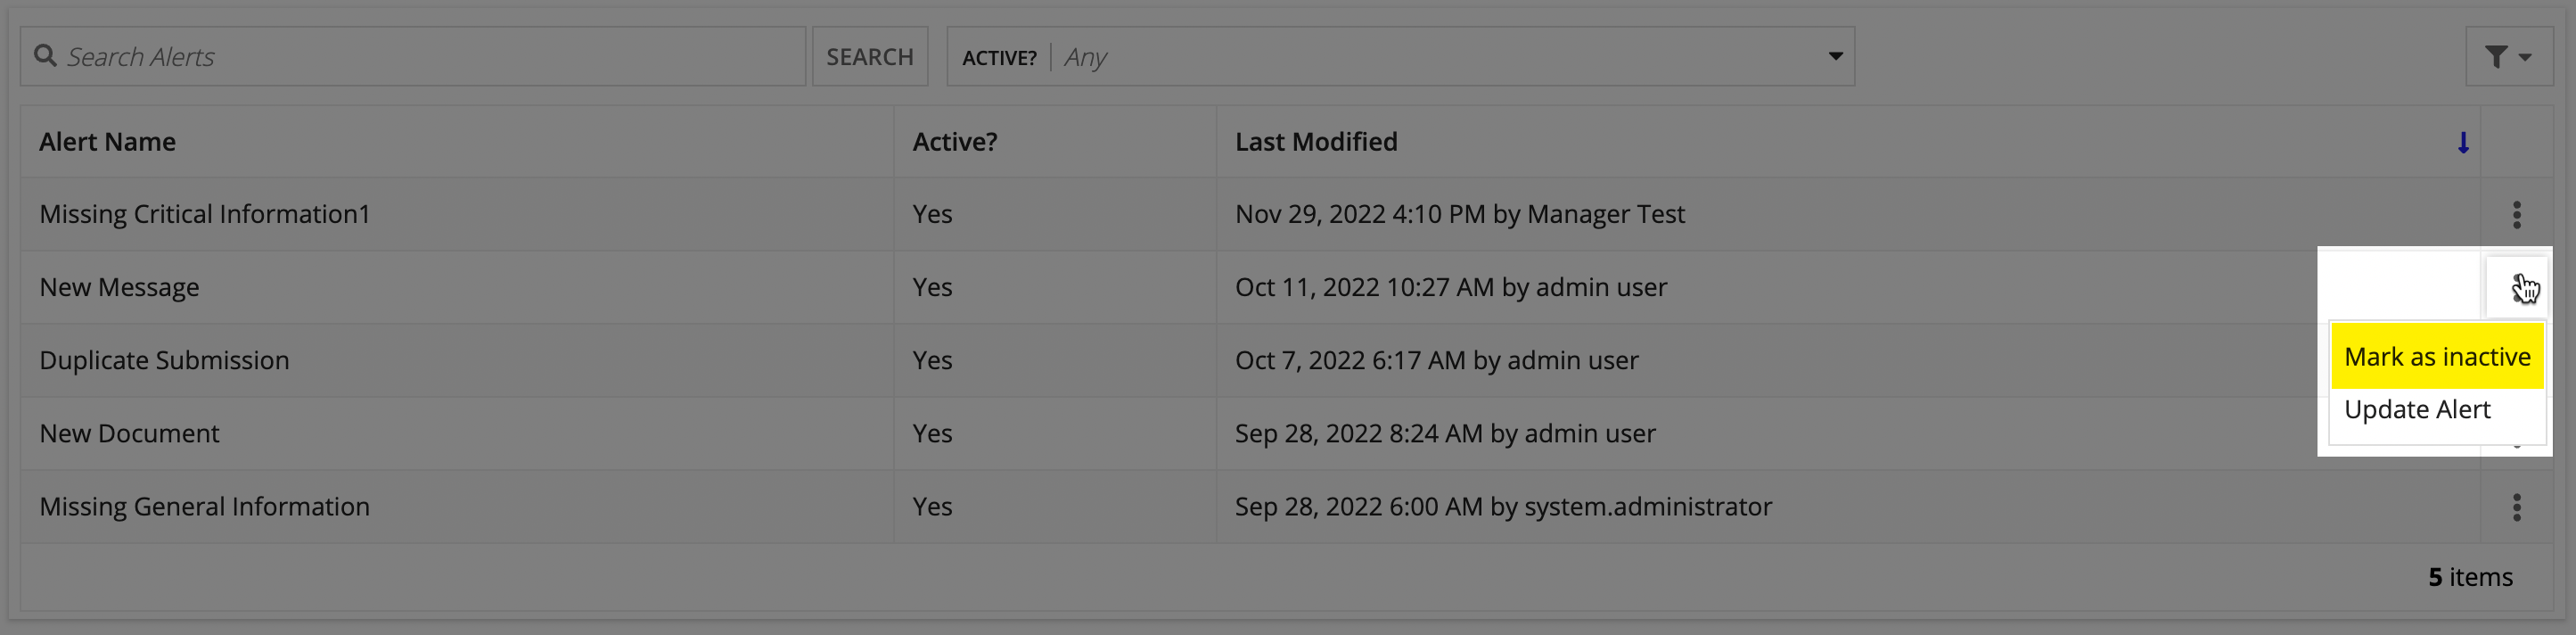 cu-configure_alerts-mark_active_inactive_highlighted.png